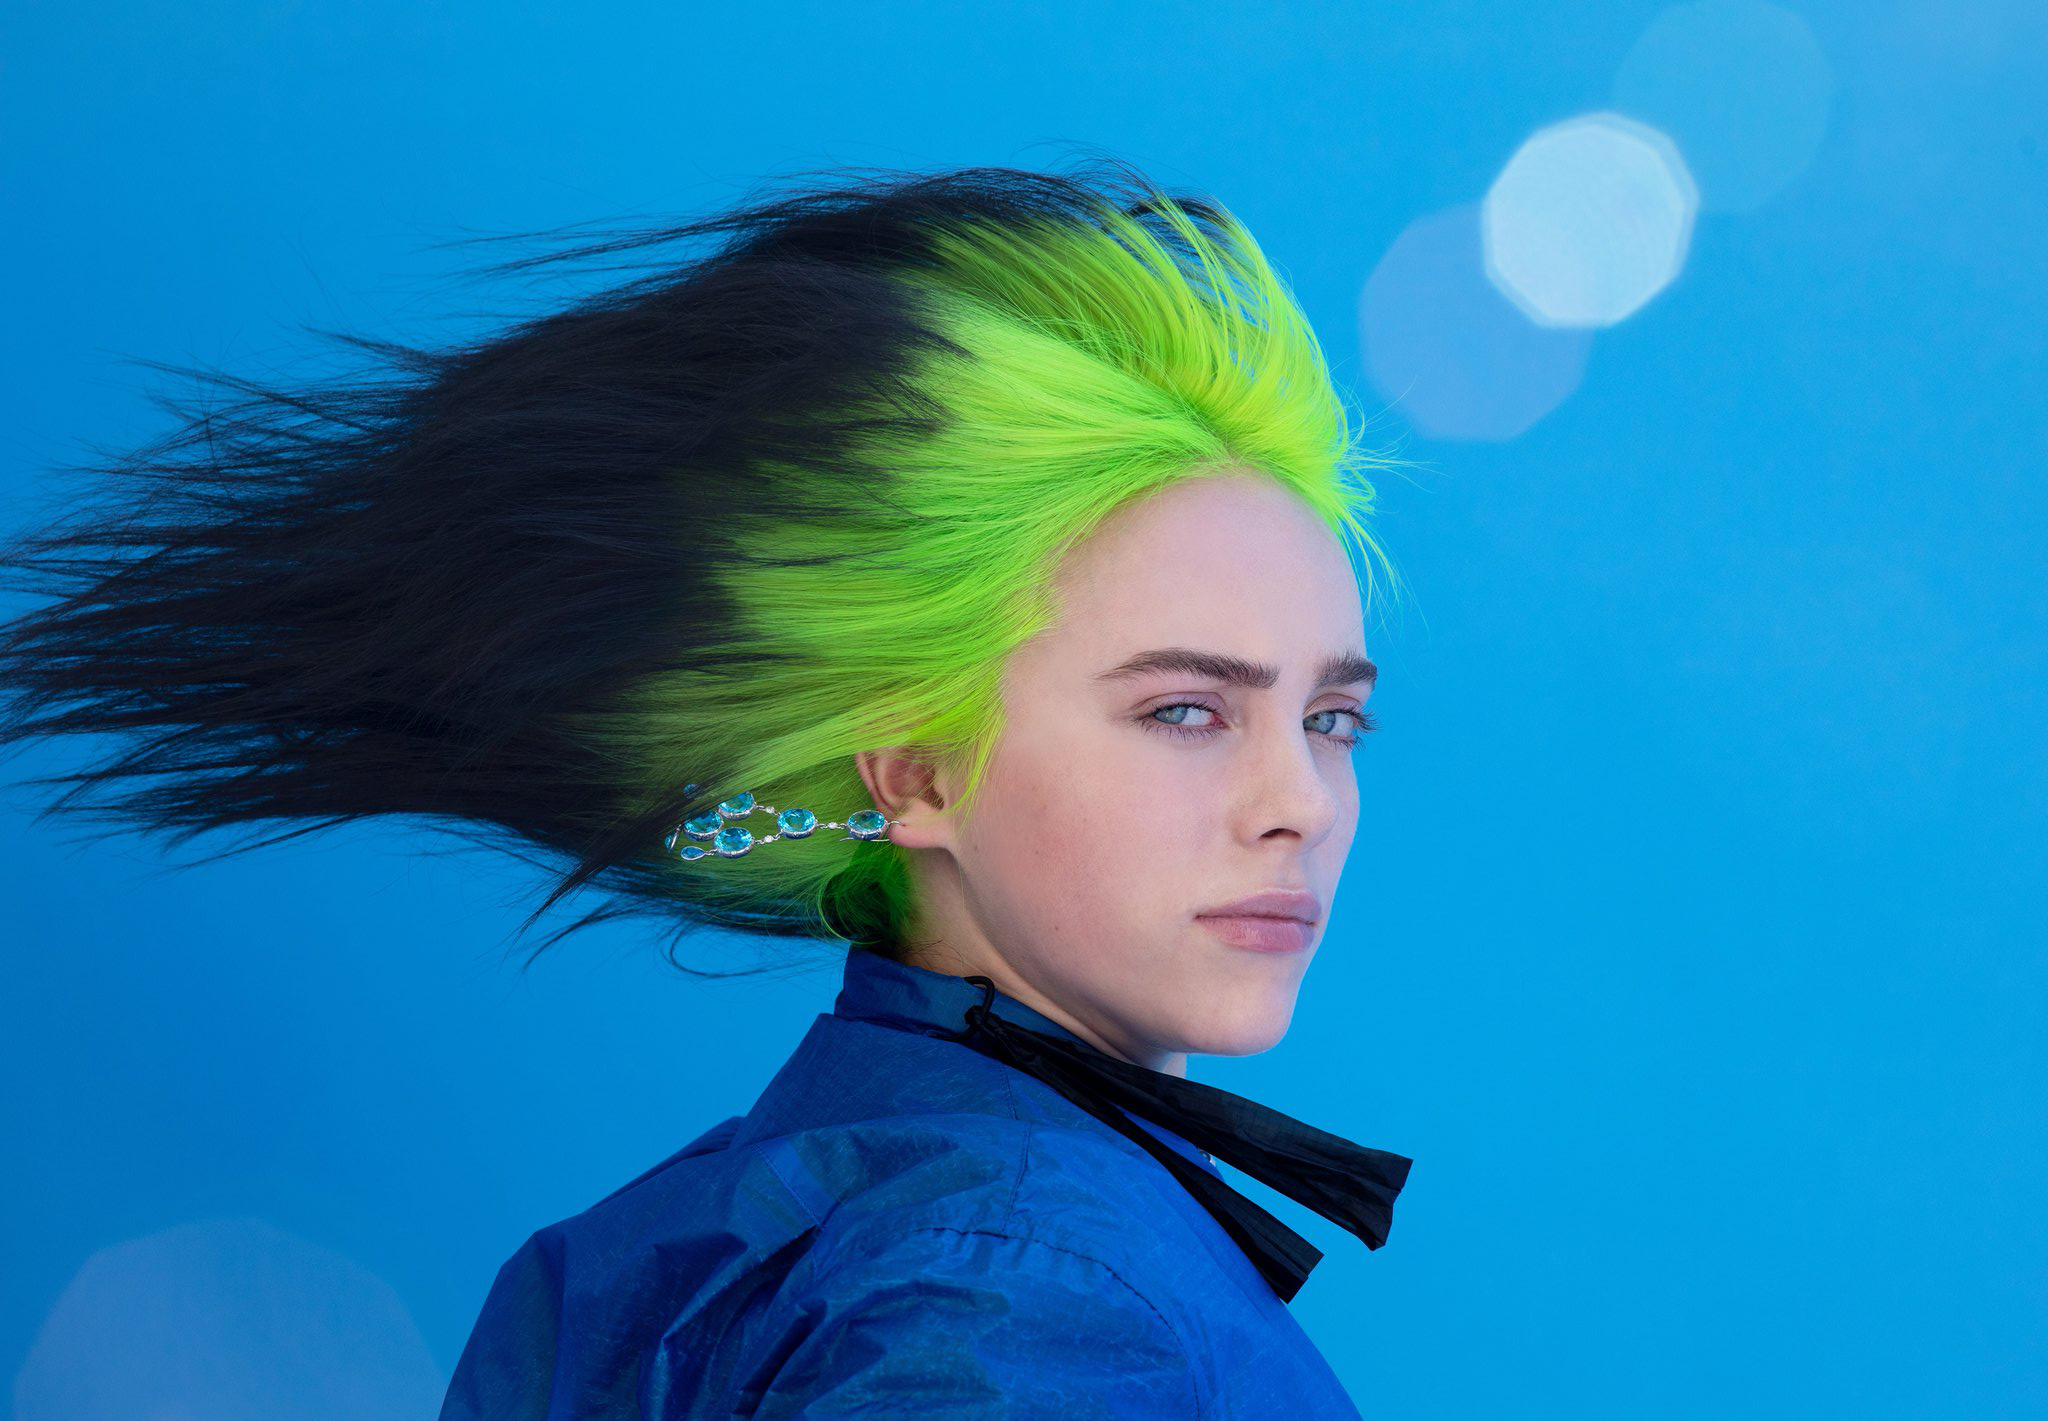 2020 Billie Eilish Wallpaper, HD Celebrities 4K Wallpapers, Images, Photos and Background